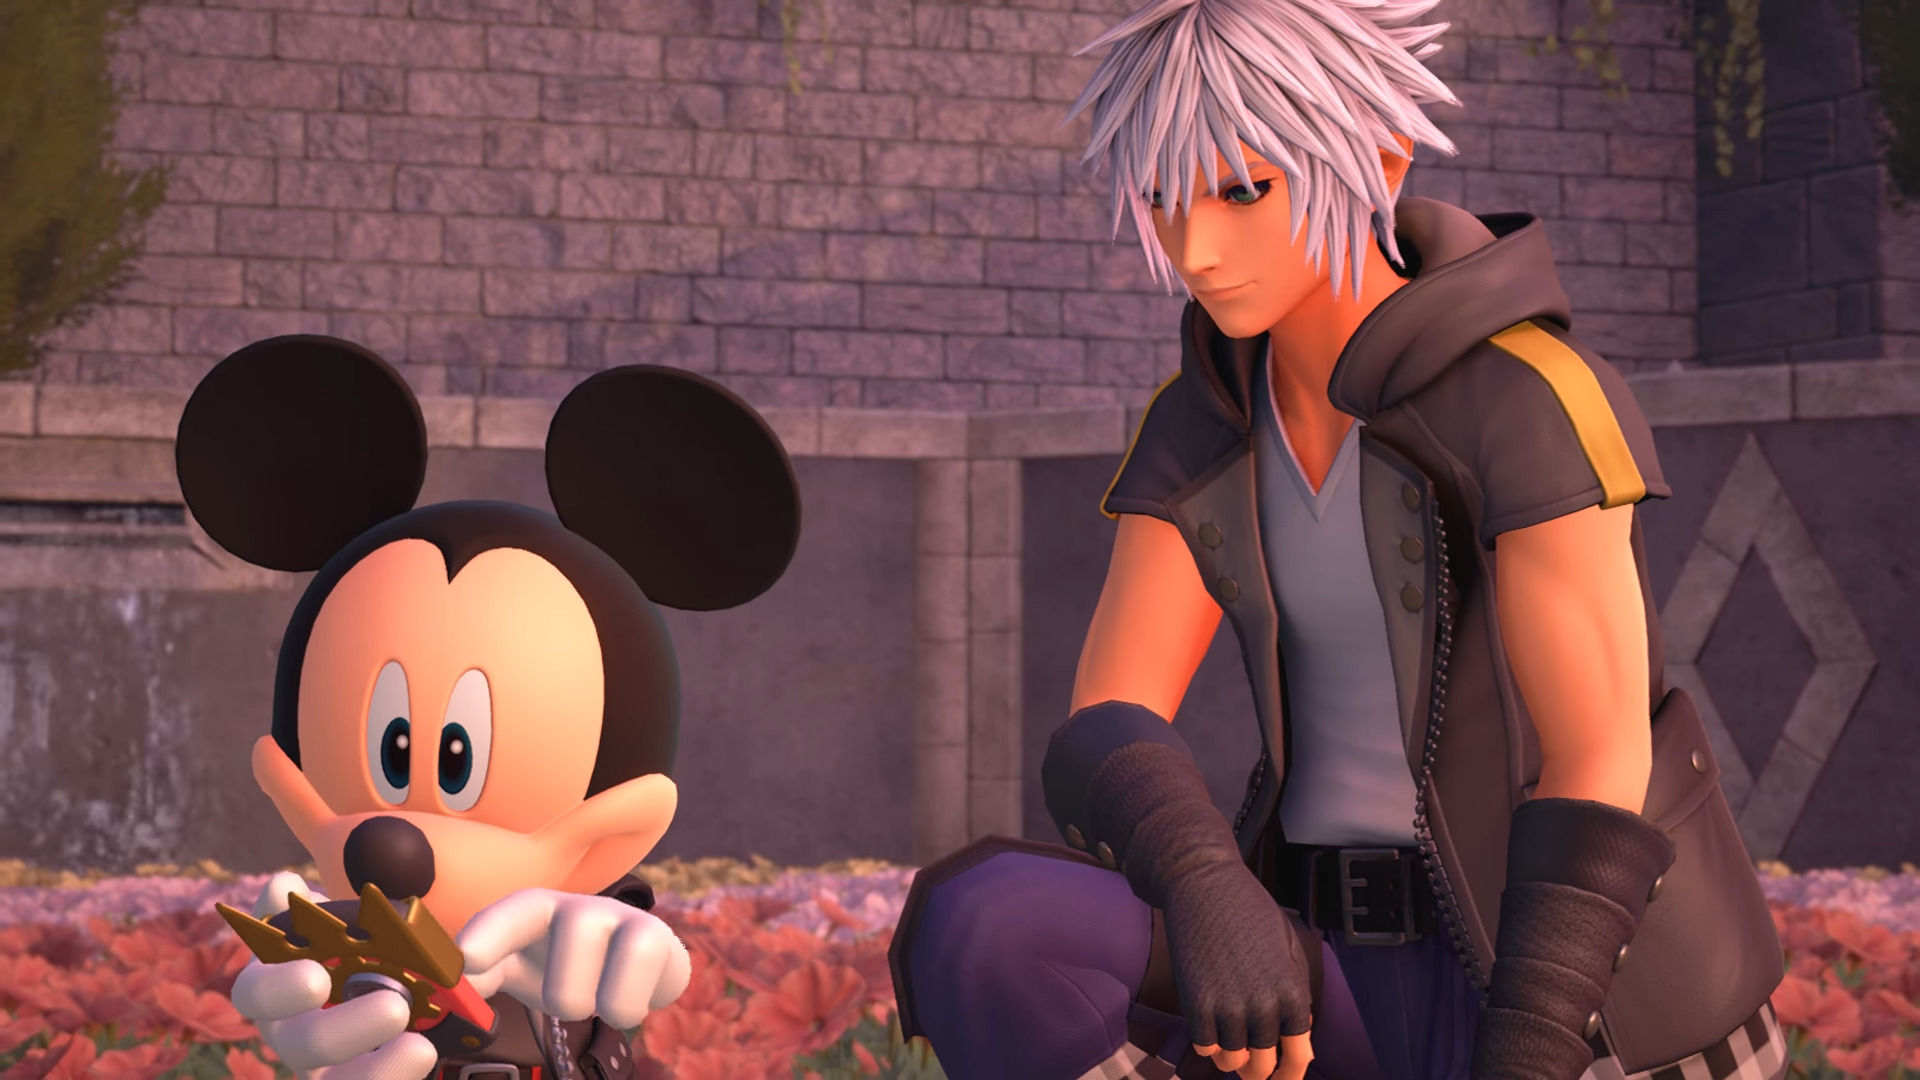 King Mickey (Chris Diamantopoulos) and Riku (David Gallagher) wish Sora (Haley Joel Osment) the best of luck in Kingdom Hearts 3 (2019), Square Enix